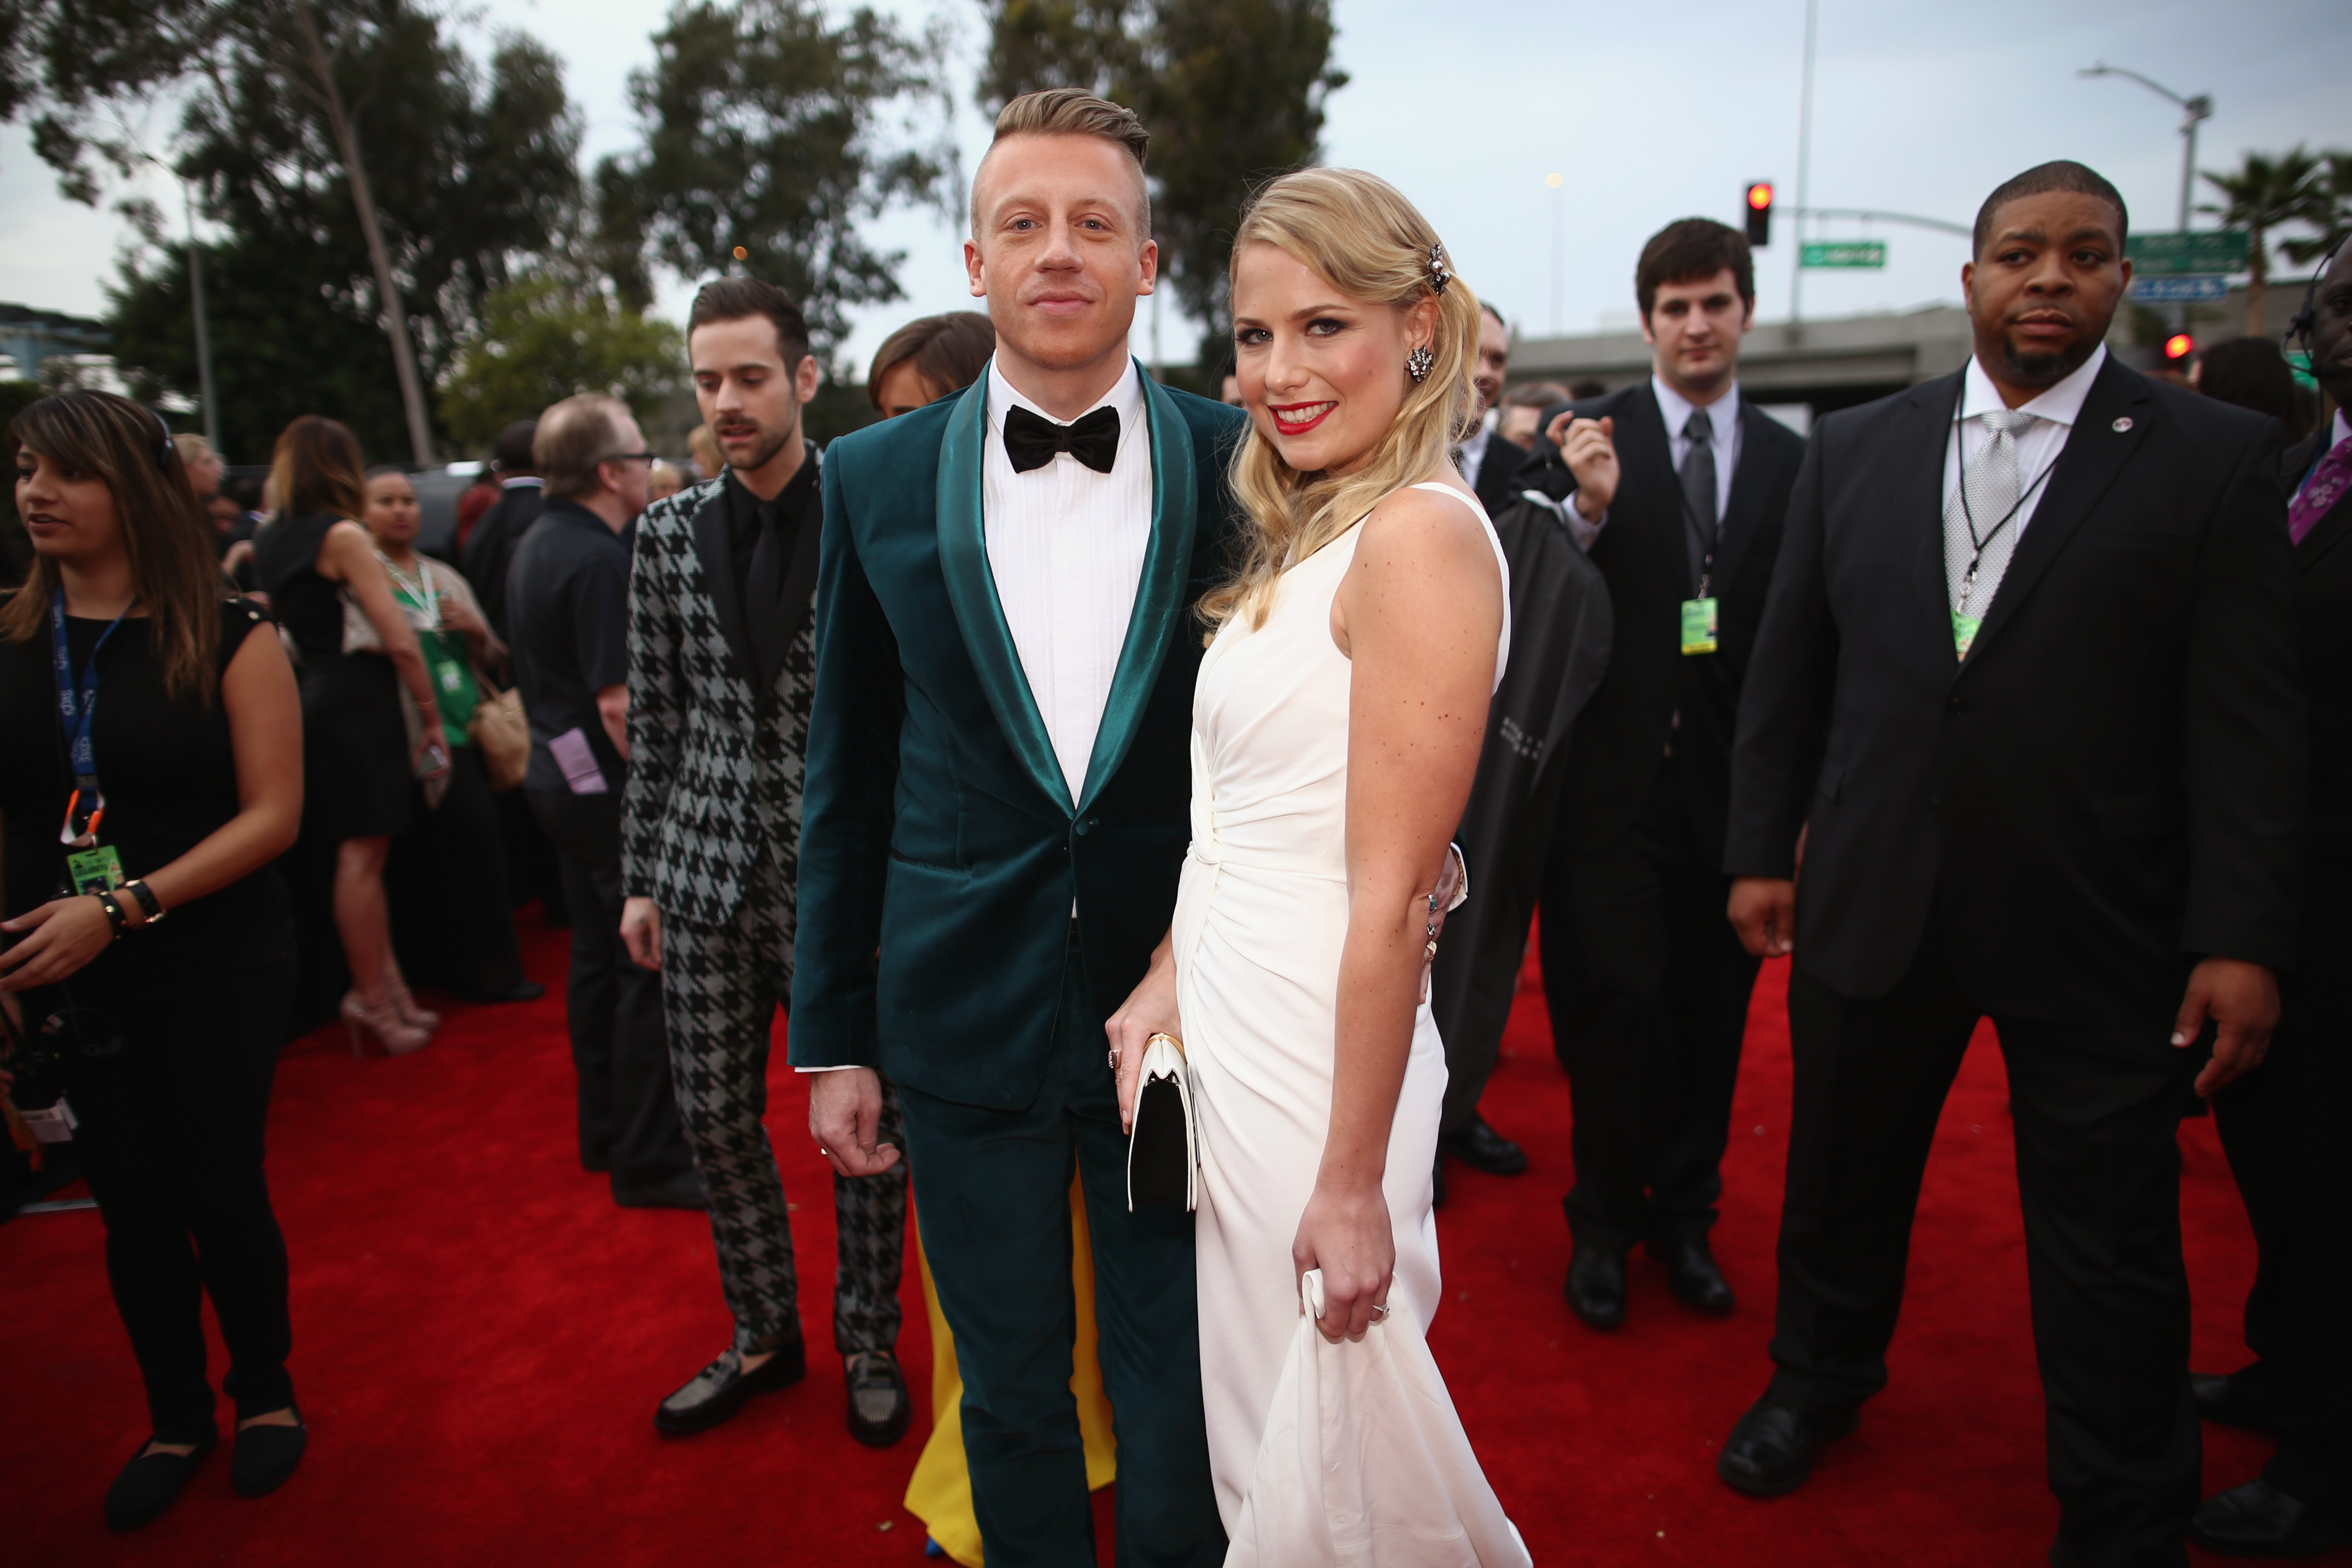 Macklemore and Tricia Davis pictured at the 56th Grammy Awards at Staples Center, 20214, Los Angeles California. | Photo: Getty Images